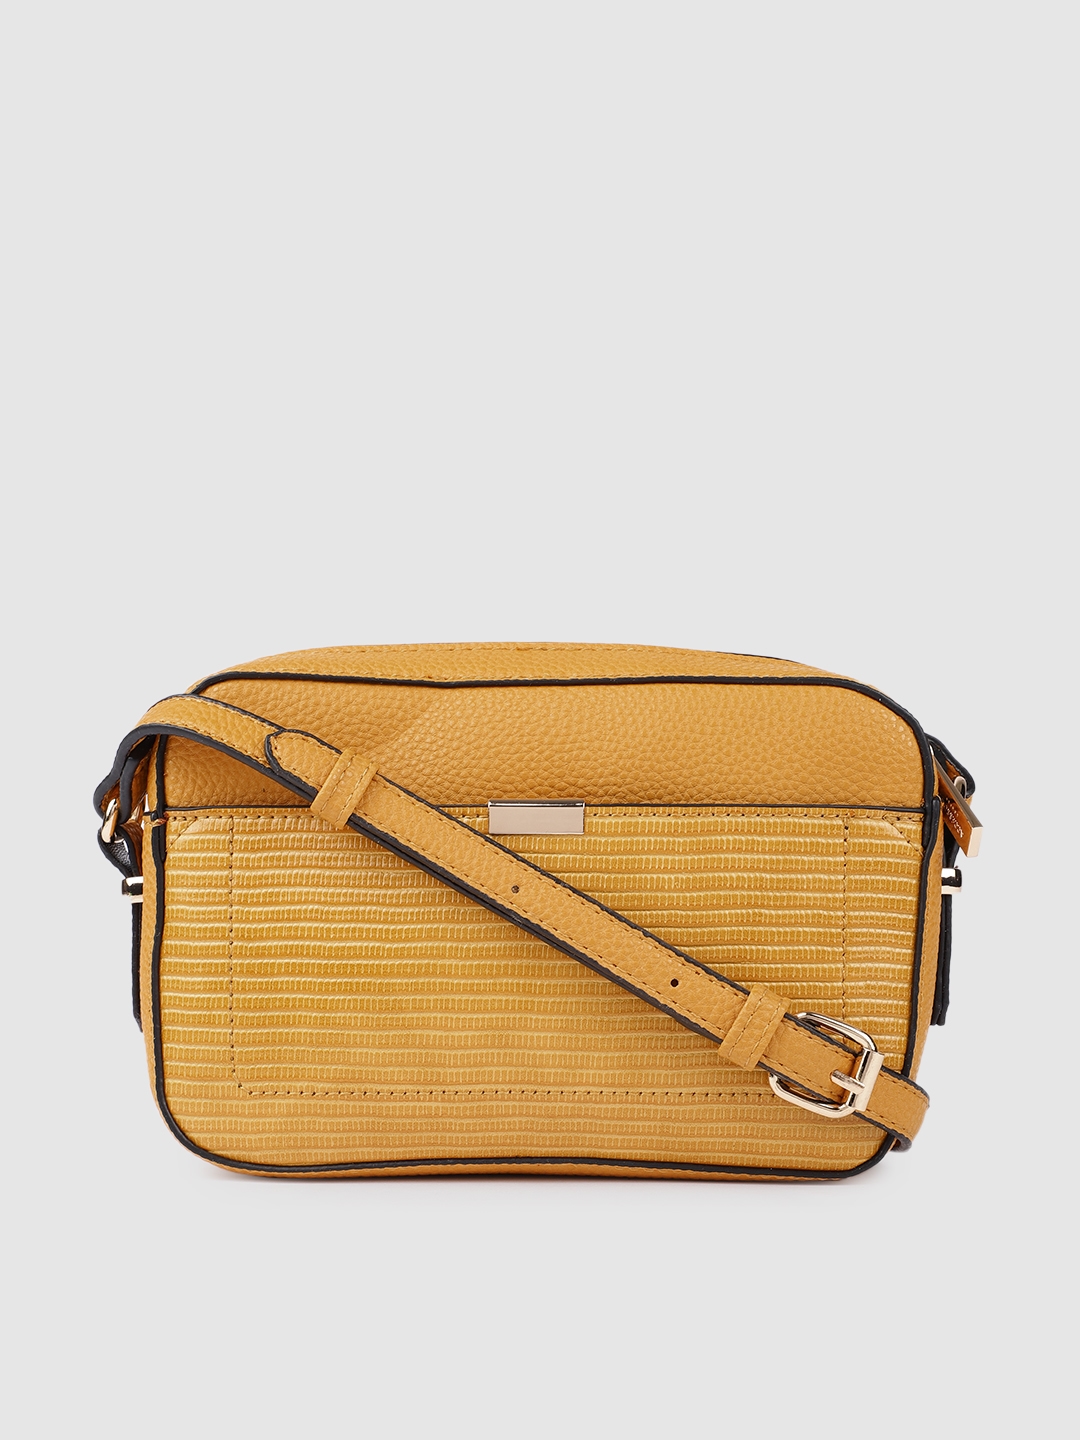 Accessorize Yellow Crocodile Textured Structured Piper Camera Sling Bag